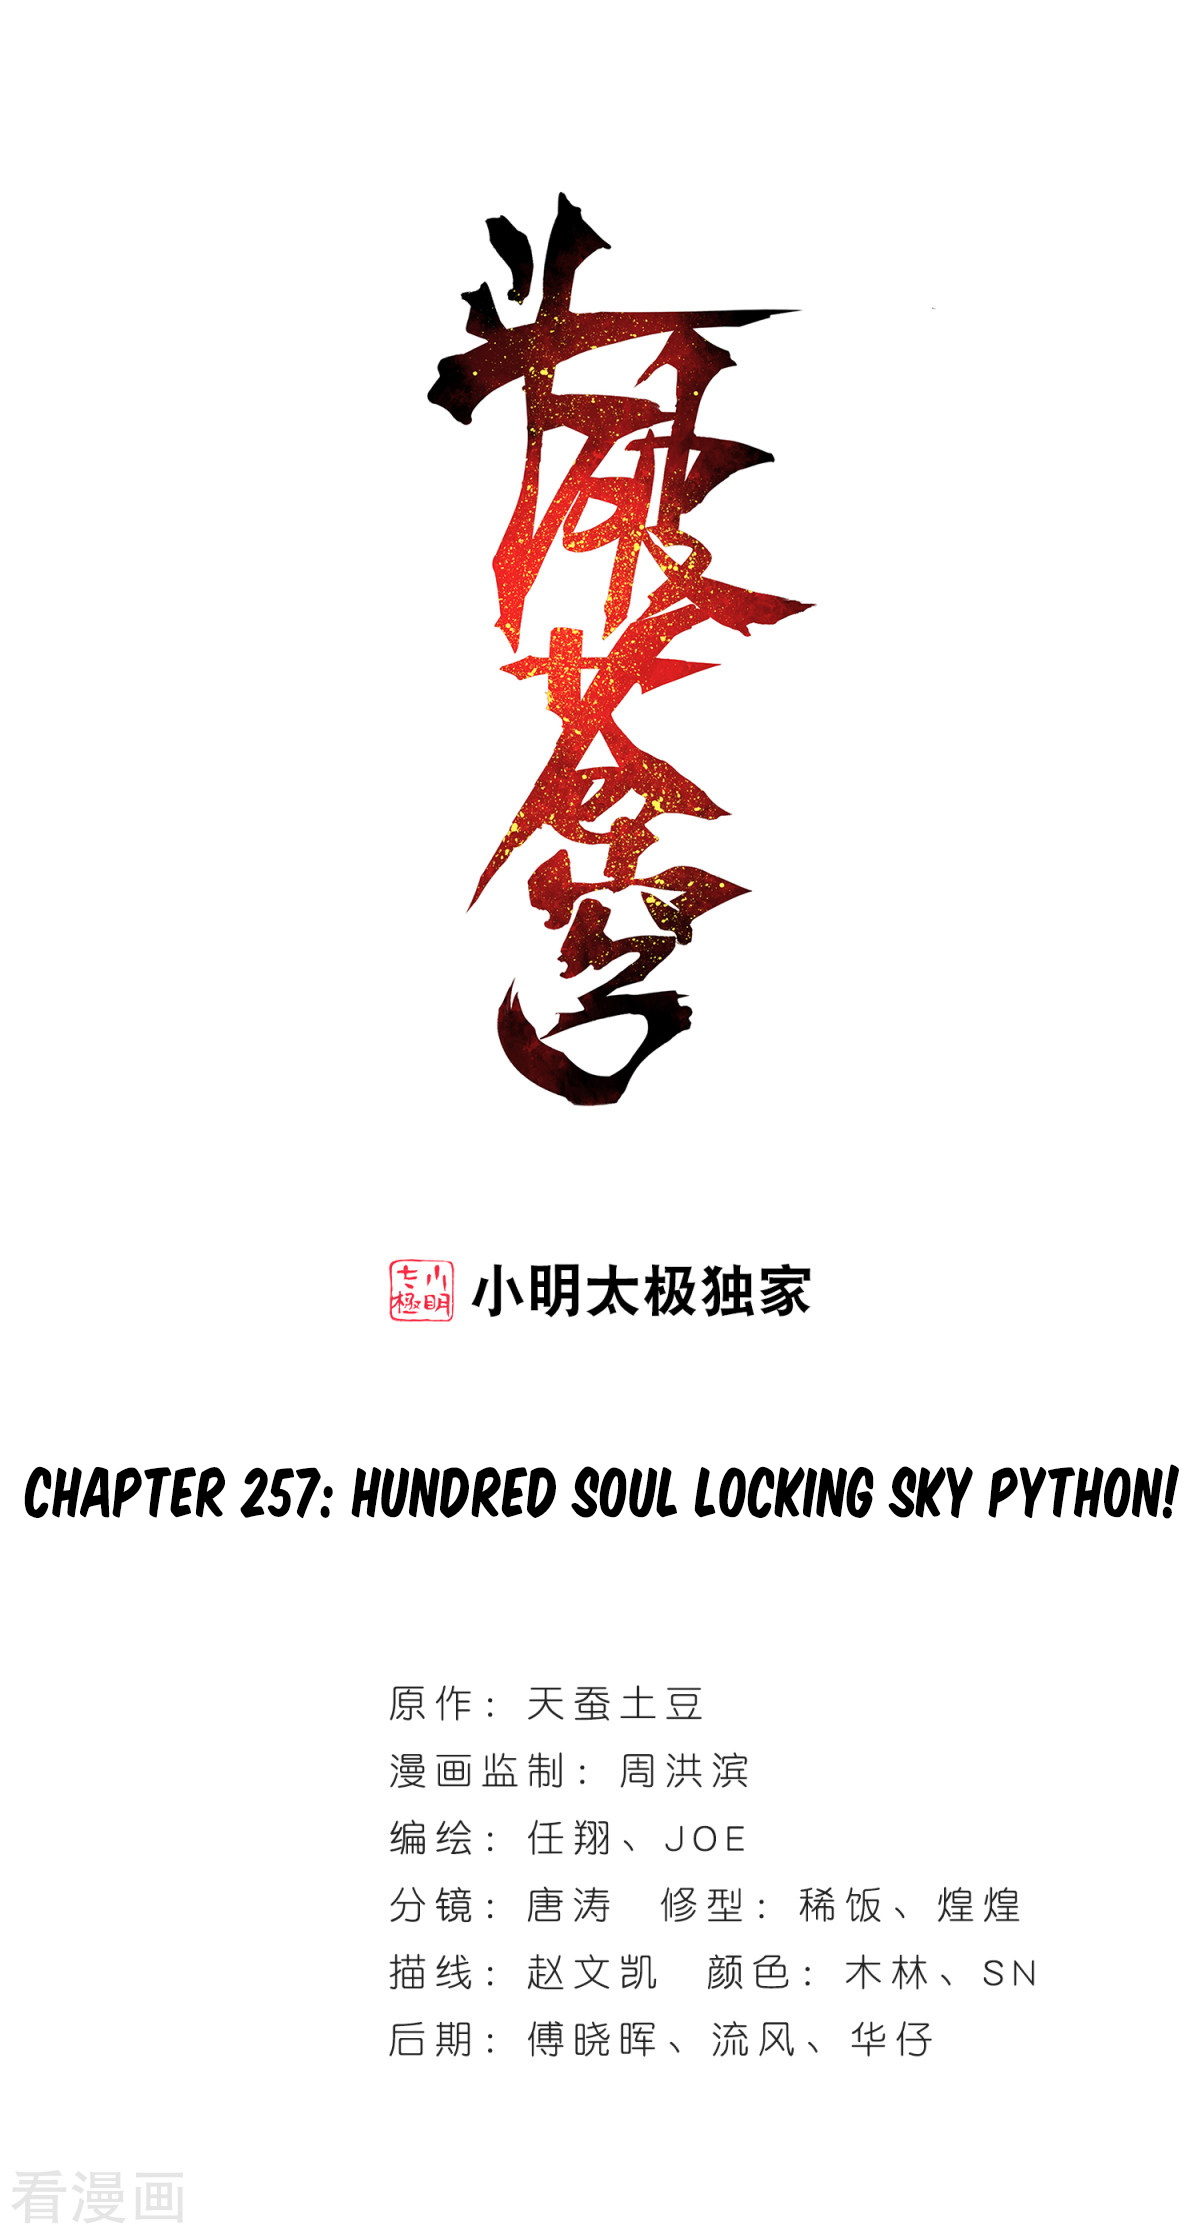 Fights Breaking Through The Heavens Ch. 257 Hundred Soul Locking Sky Python!